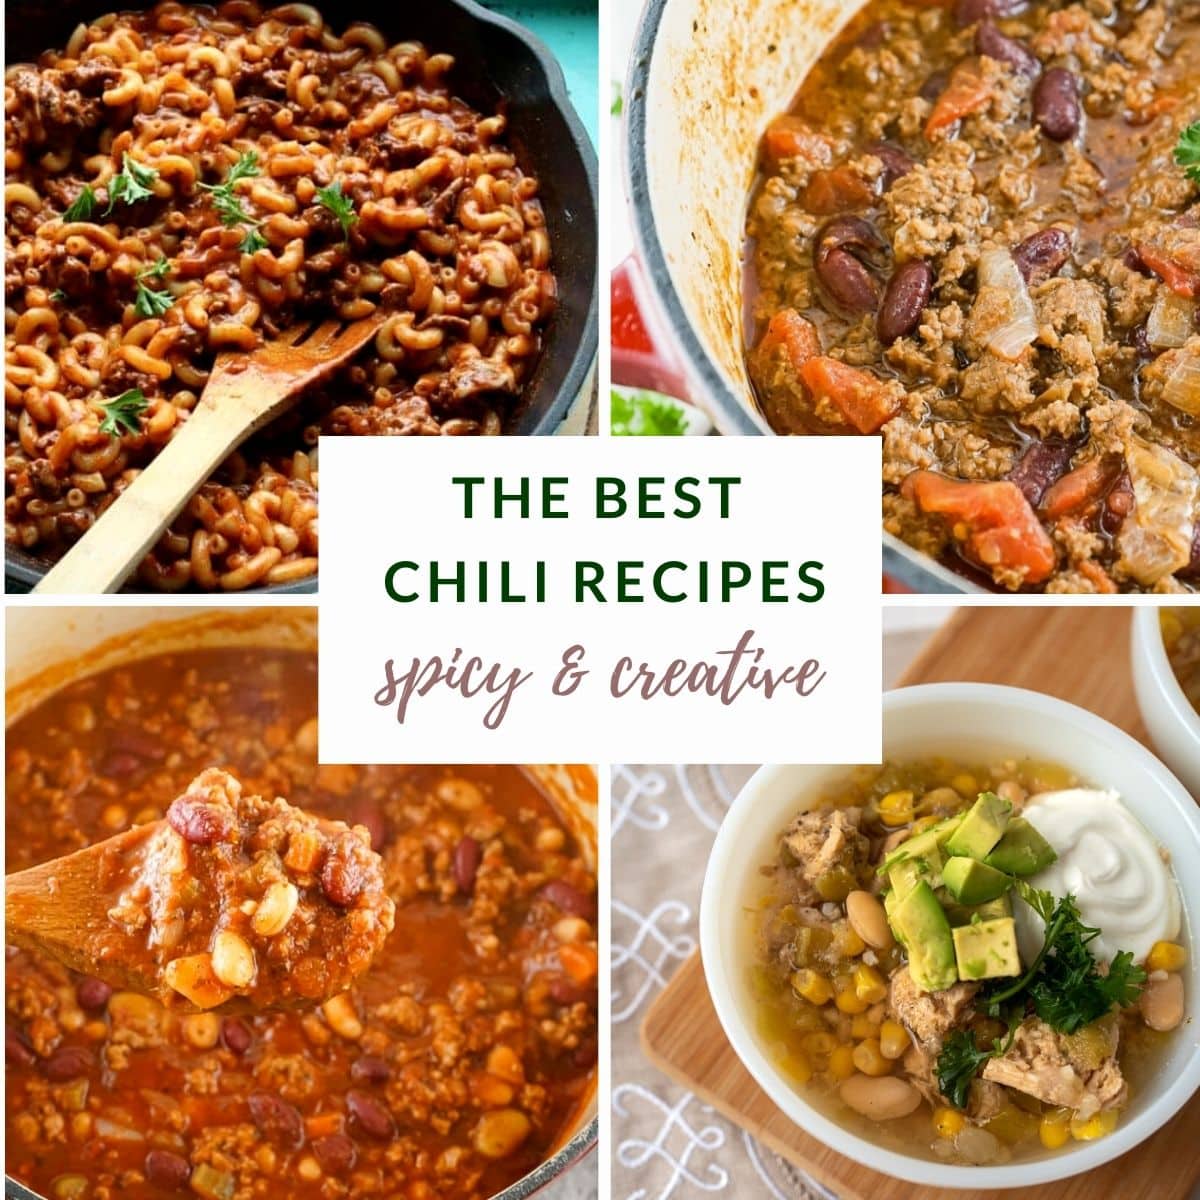 15+ Fall Inspired Slow Cooker Recipes - My Kitchen Craze